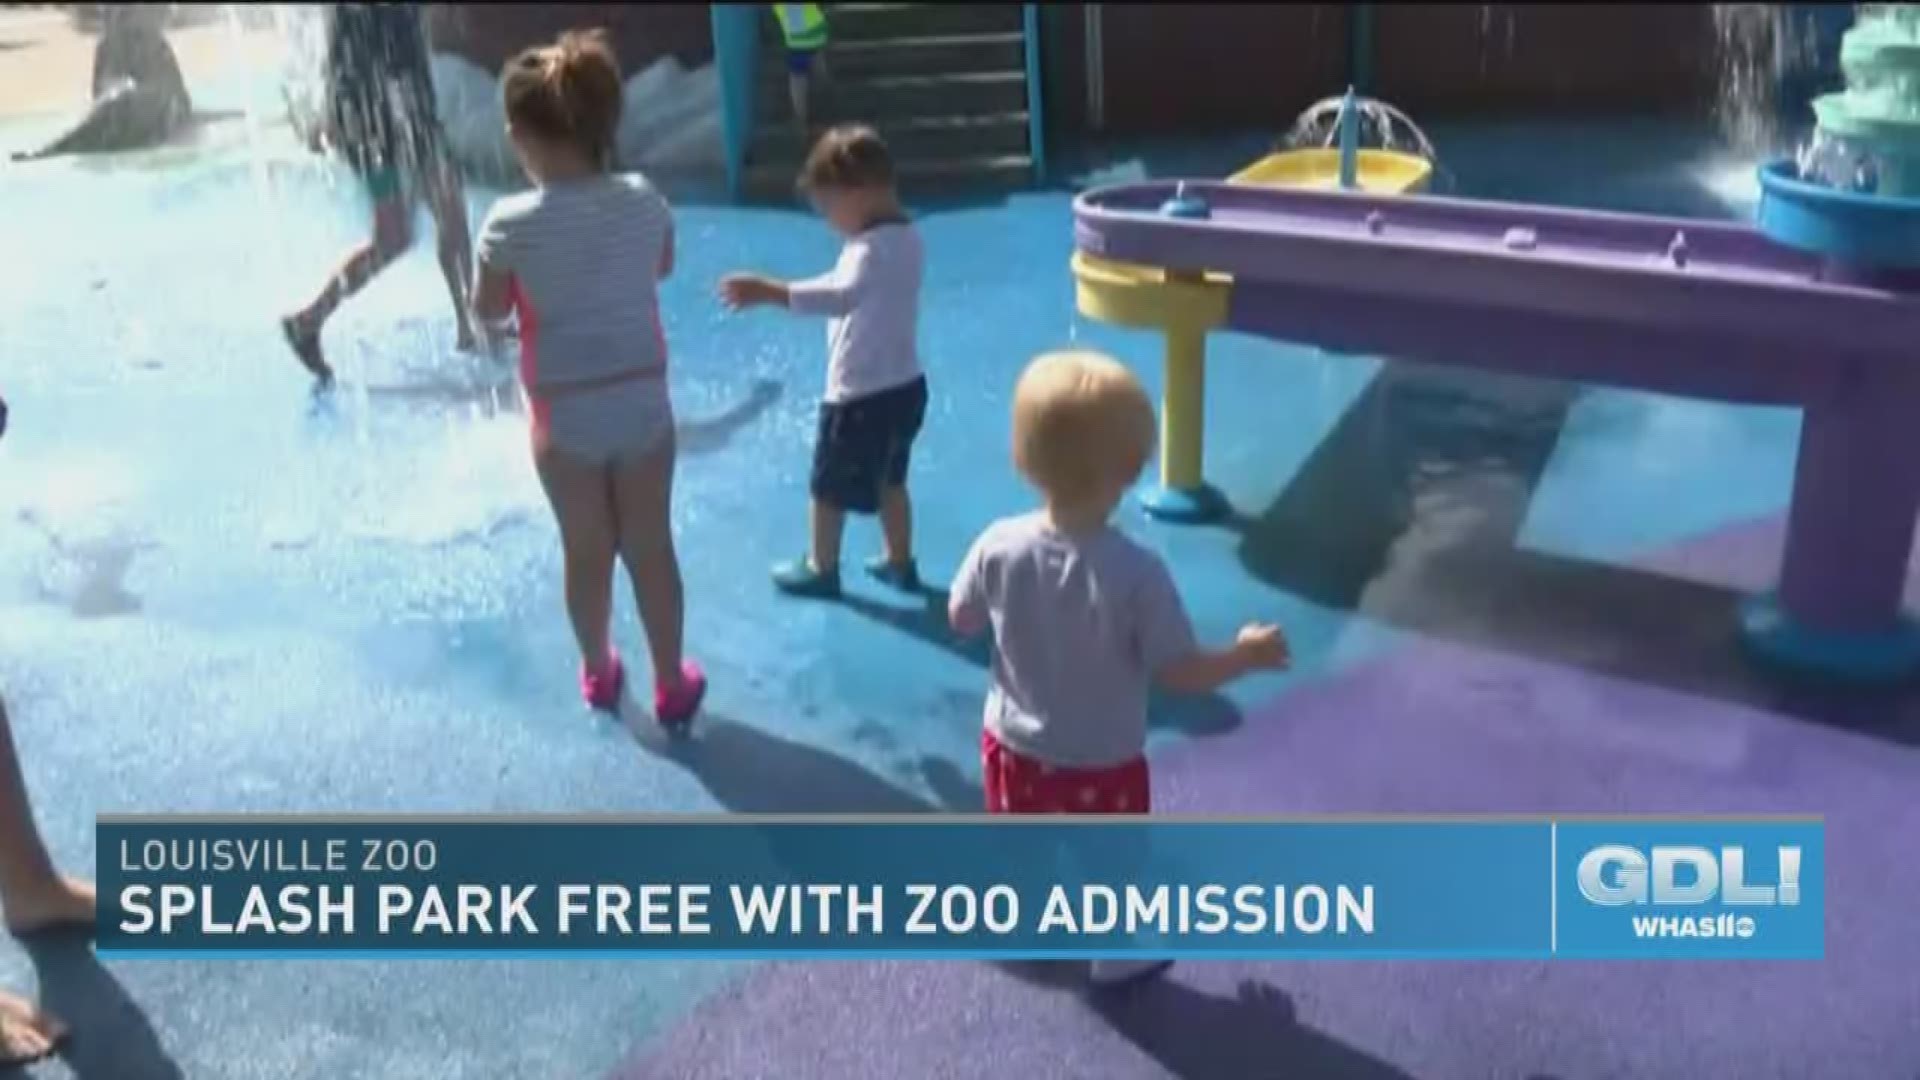 The Splash Park at the Louisville Zoo is free with admission. The Louisville Zoo is located at  1100 Trevilian Way in Louisville, KY. For more information, go to LouisvilleZoo.org or call 502-459-2181.